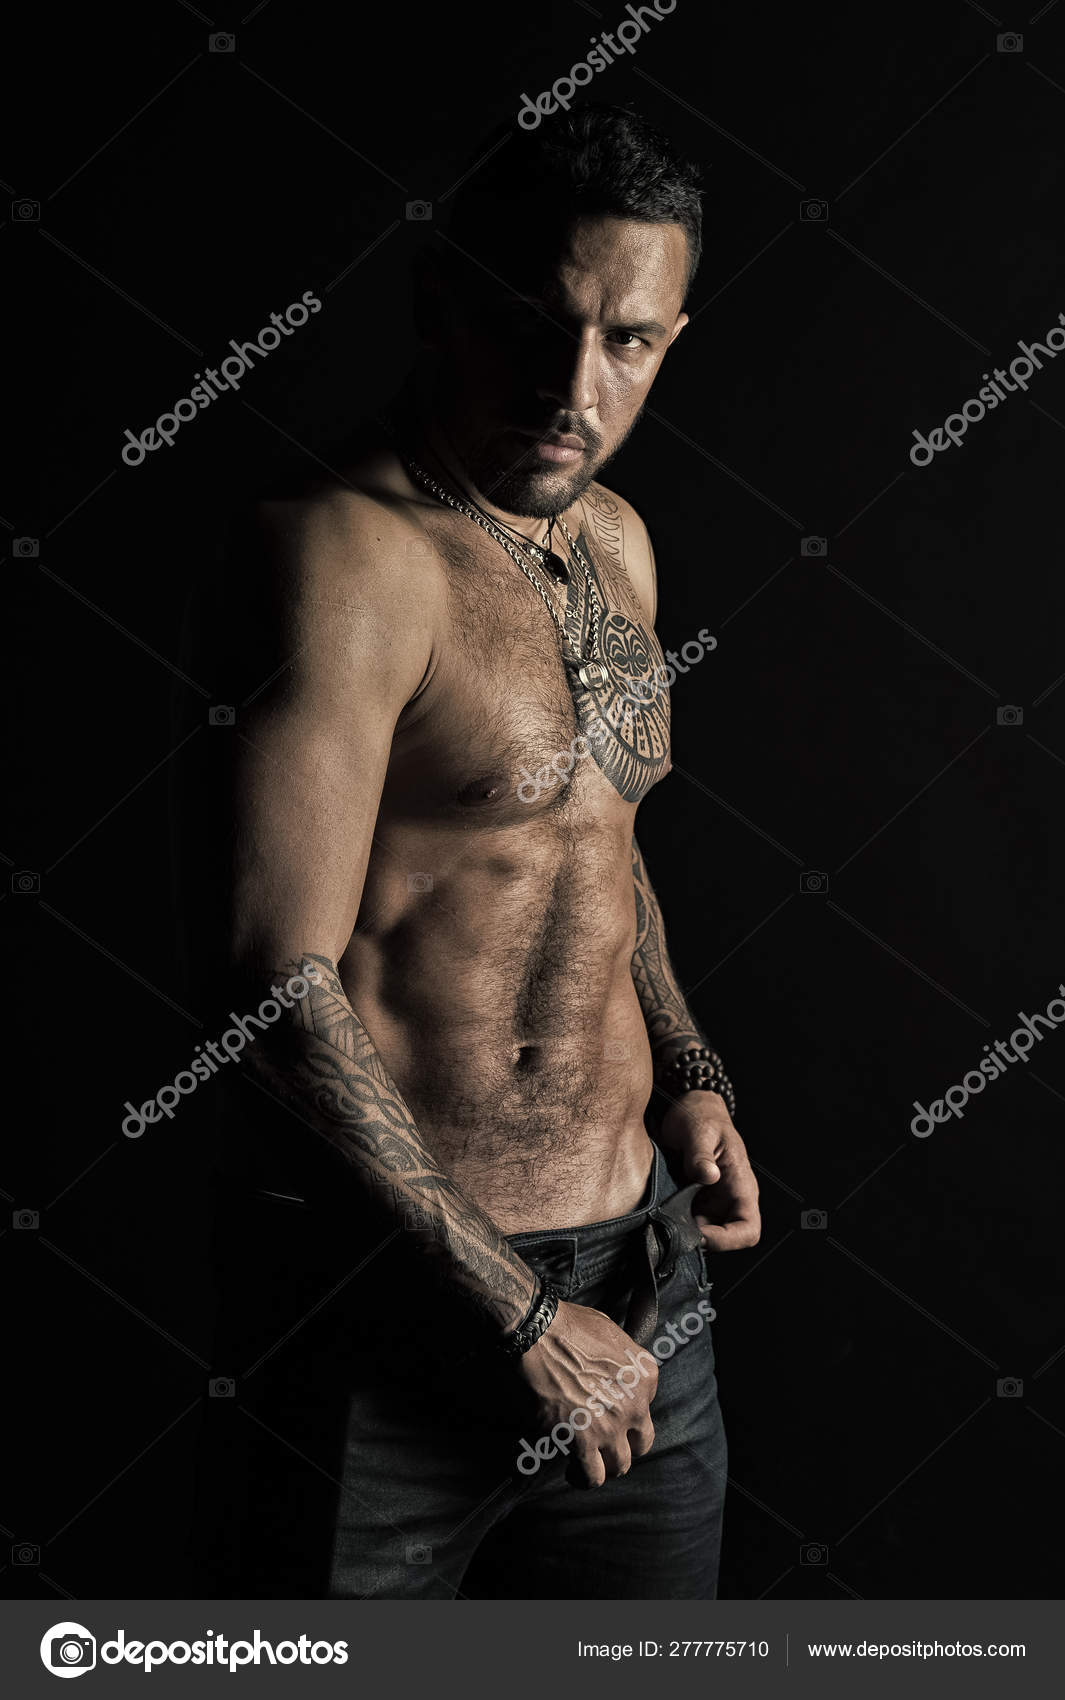 Bearded man shirtless with fit torso. Man with tattoo design on skin.  Fashion model buckle leather